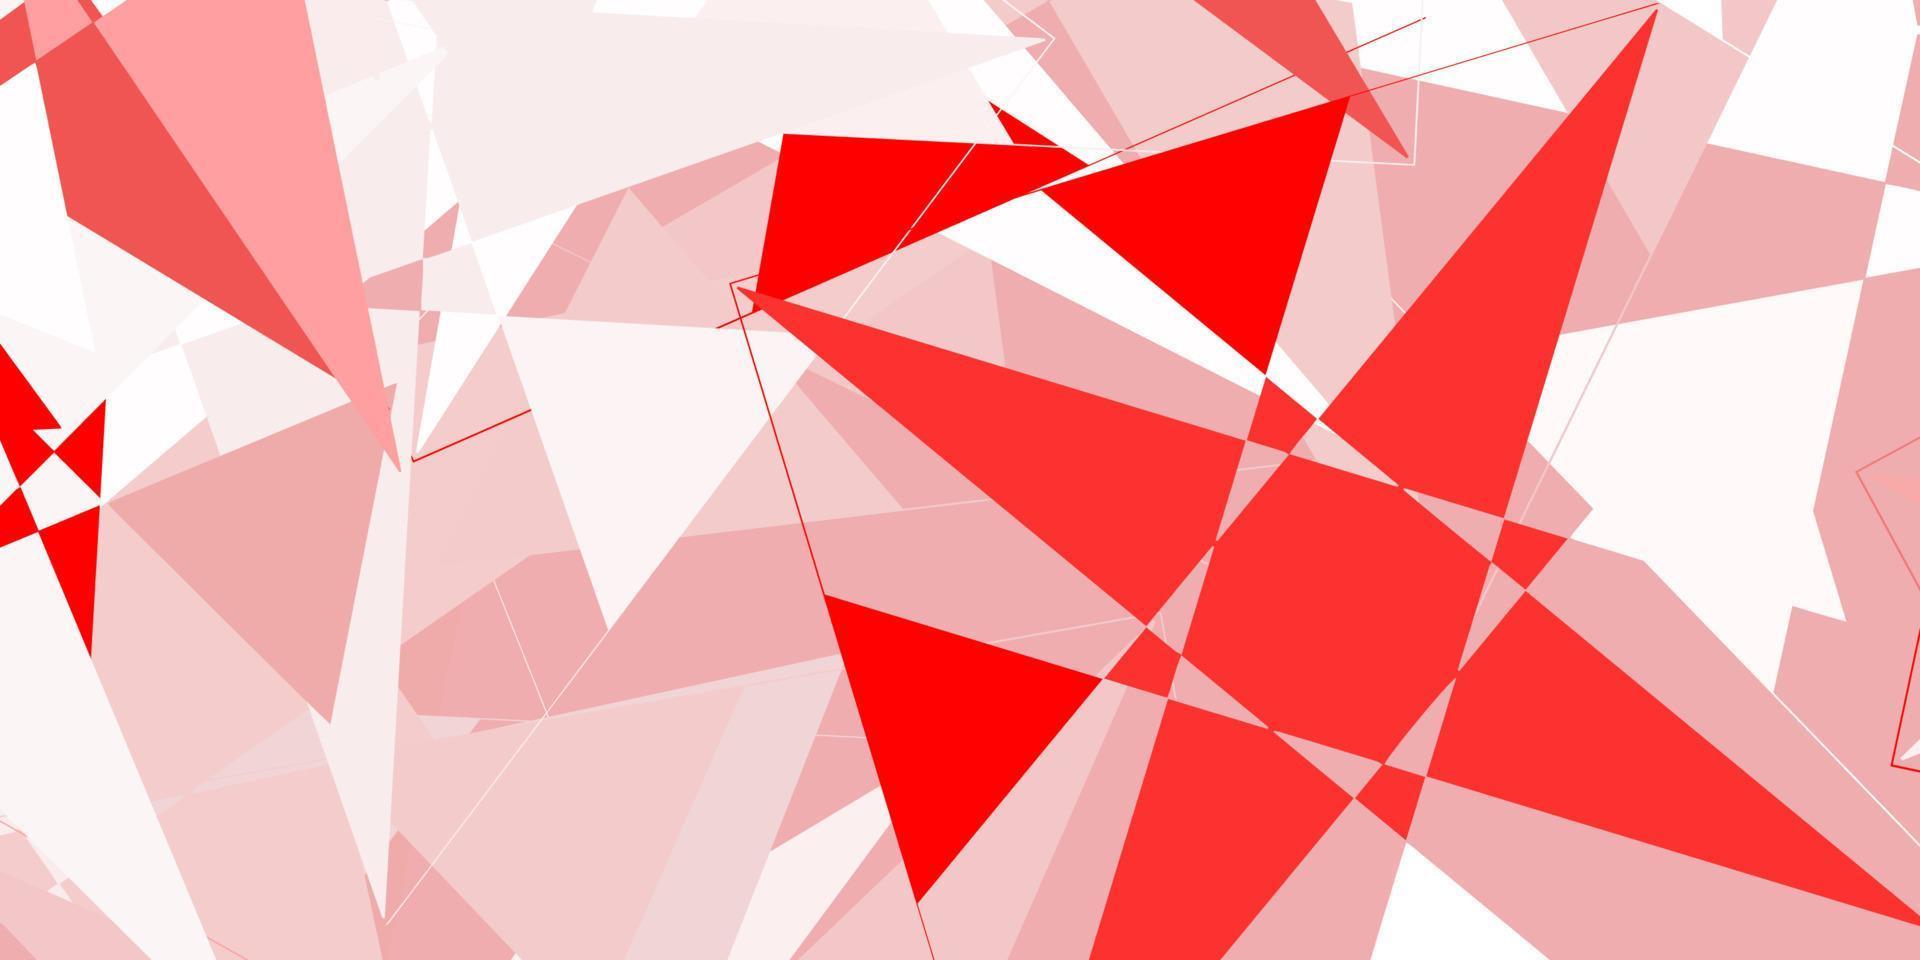 Light Red vector pattern with polygonal shapes.